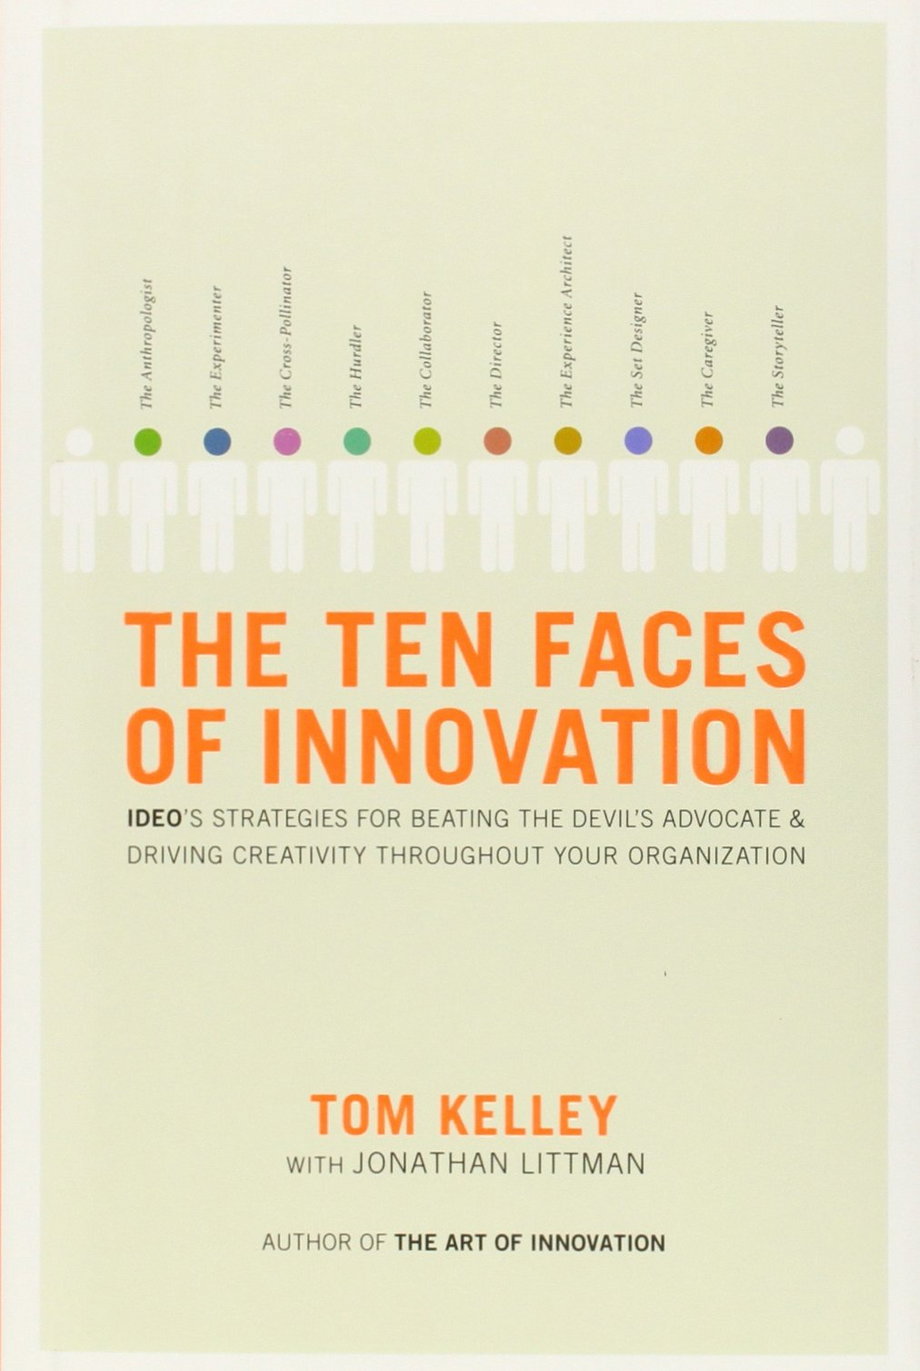 'Ten Faces of Innovation' by Tom Kelley